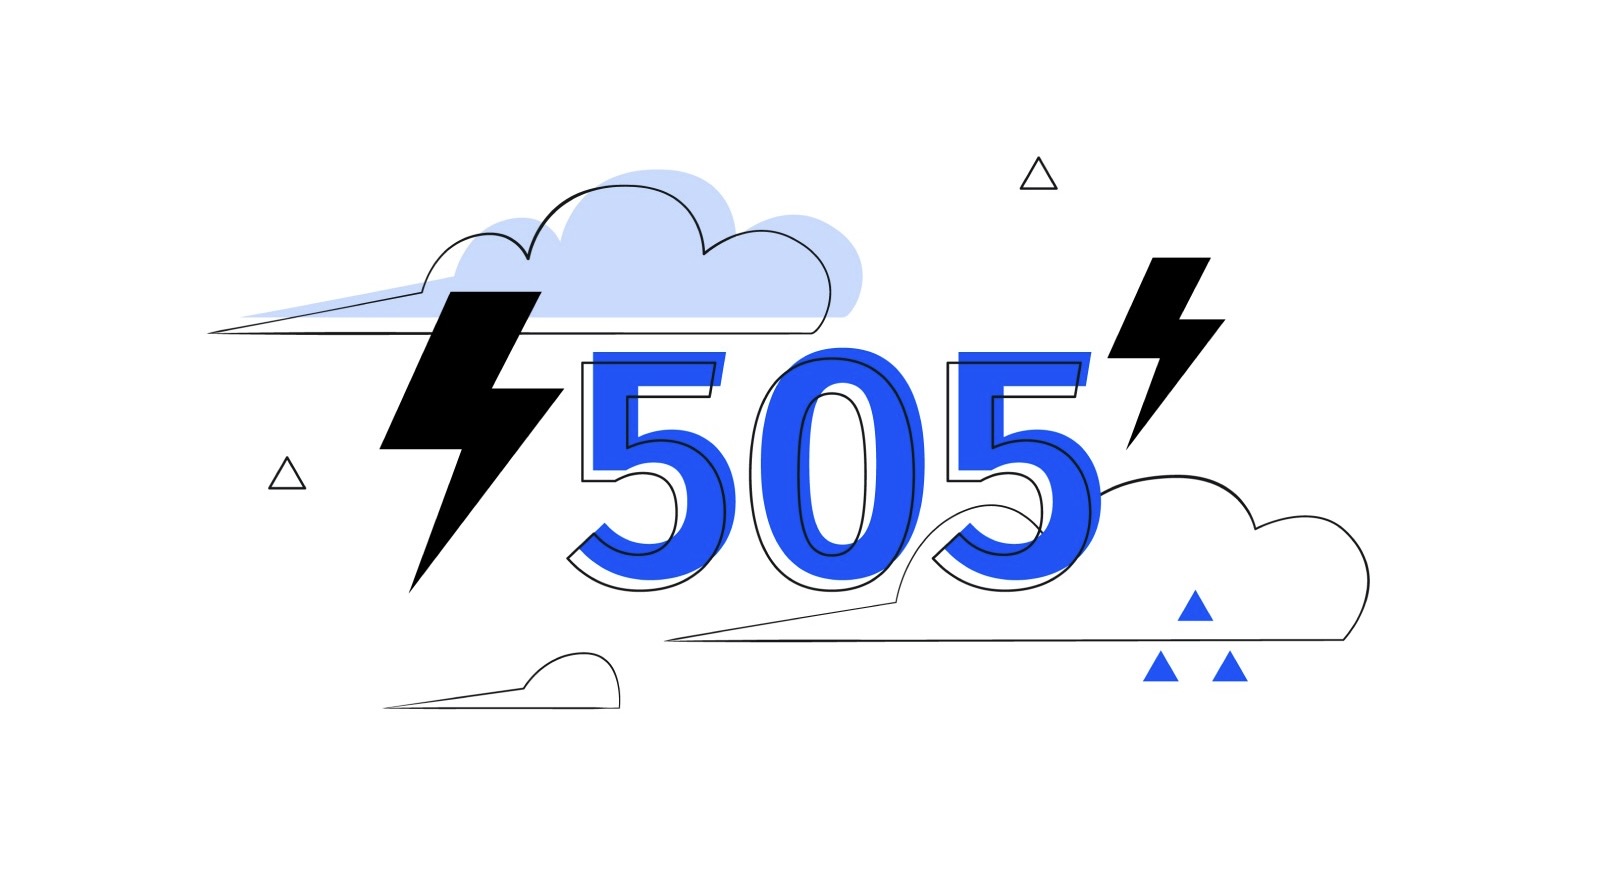 Error 505 with drawn lightning and clouds